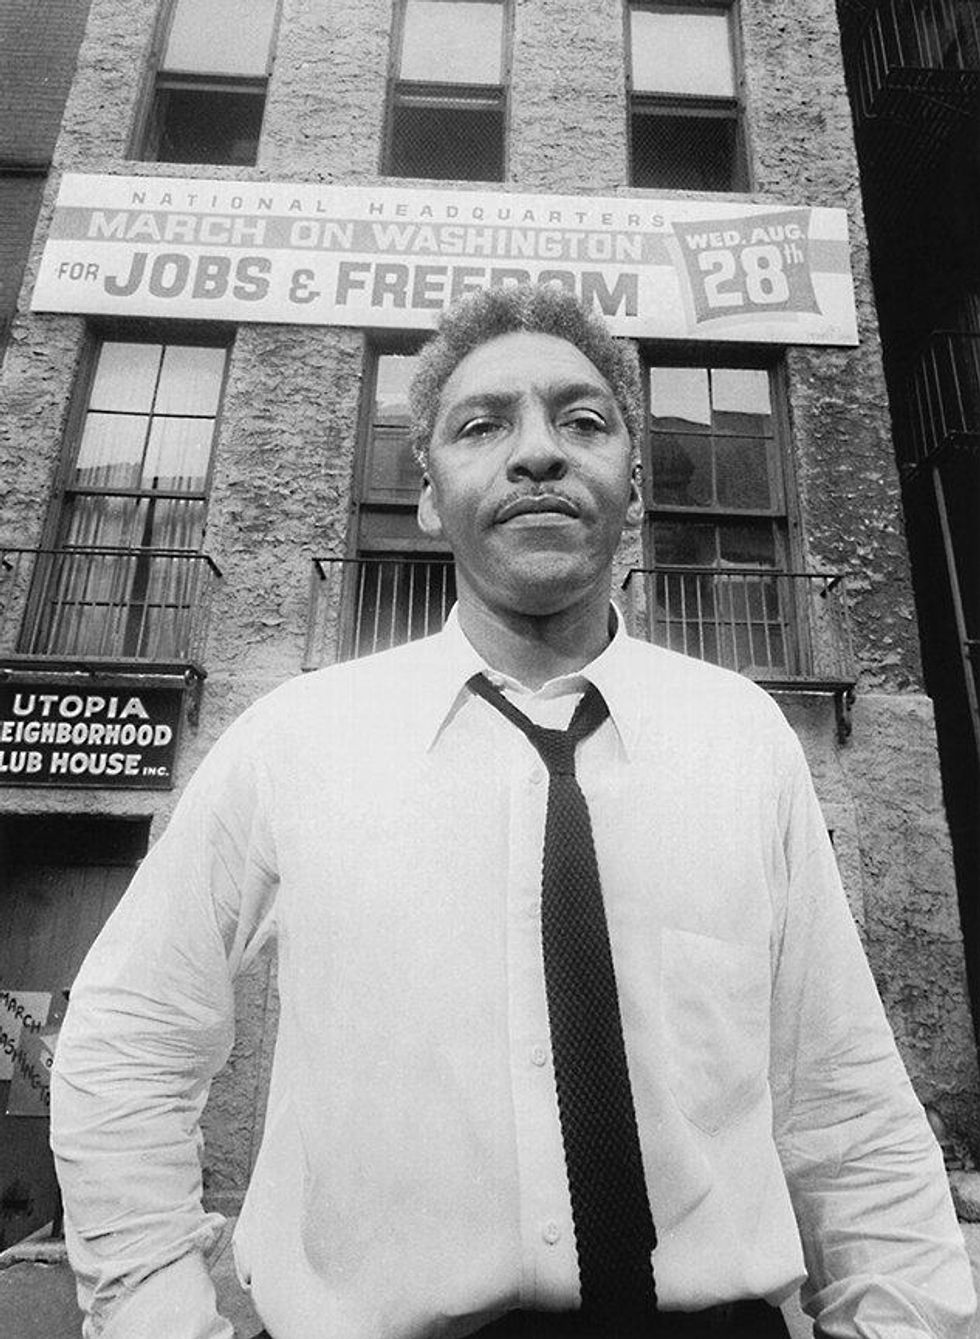 With the March on Washington less than a month away, Rustin poses in front of the National Headquarters office on West 130th Street, New York City, August 1, 1963. Photo: Associated Press/Wide World.